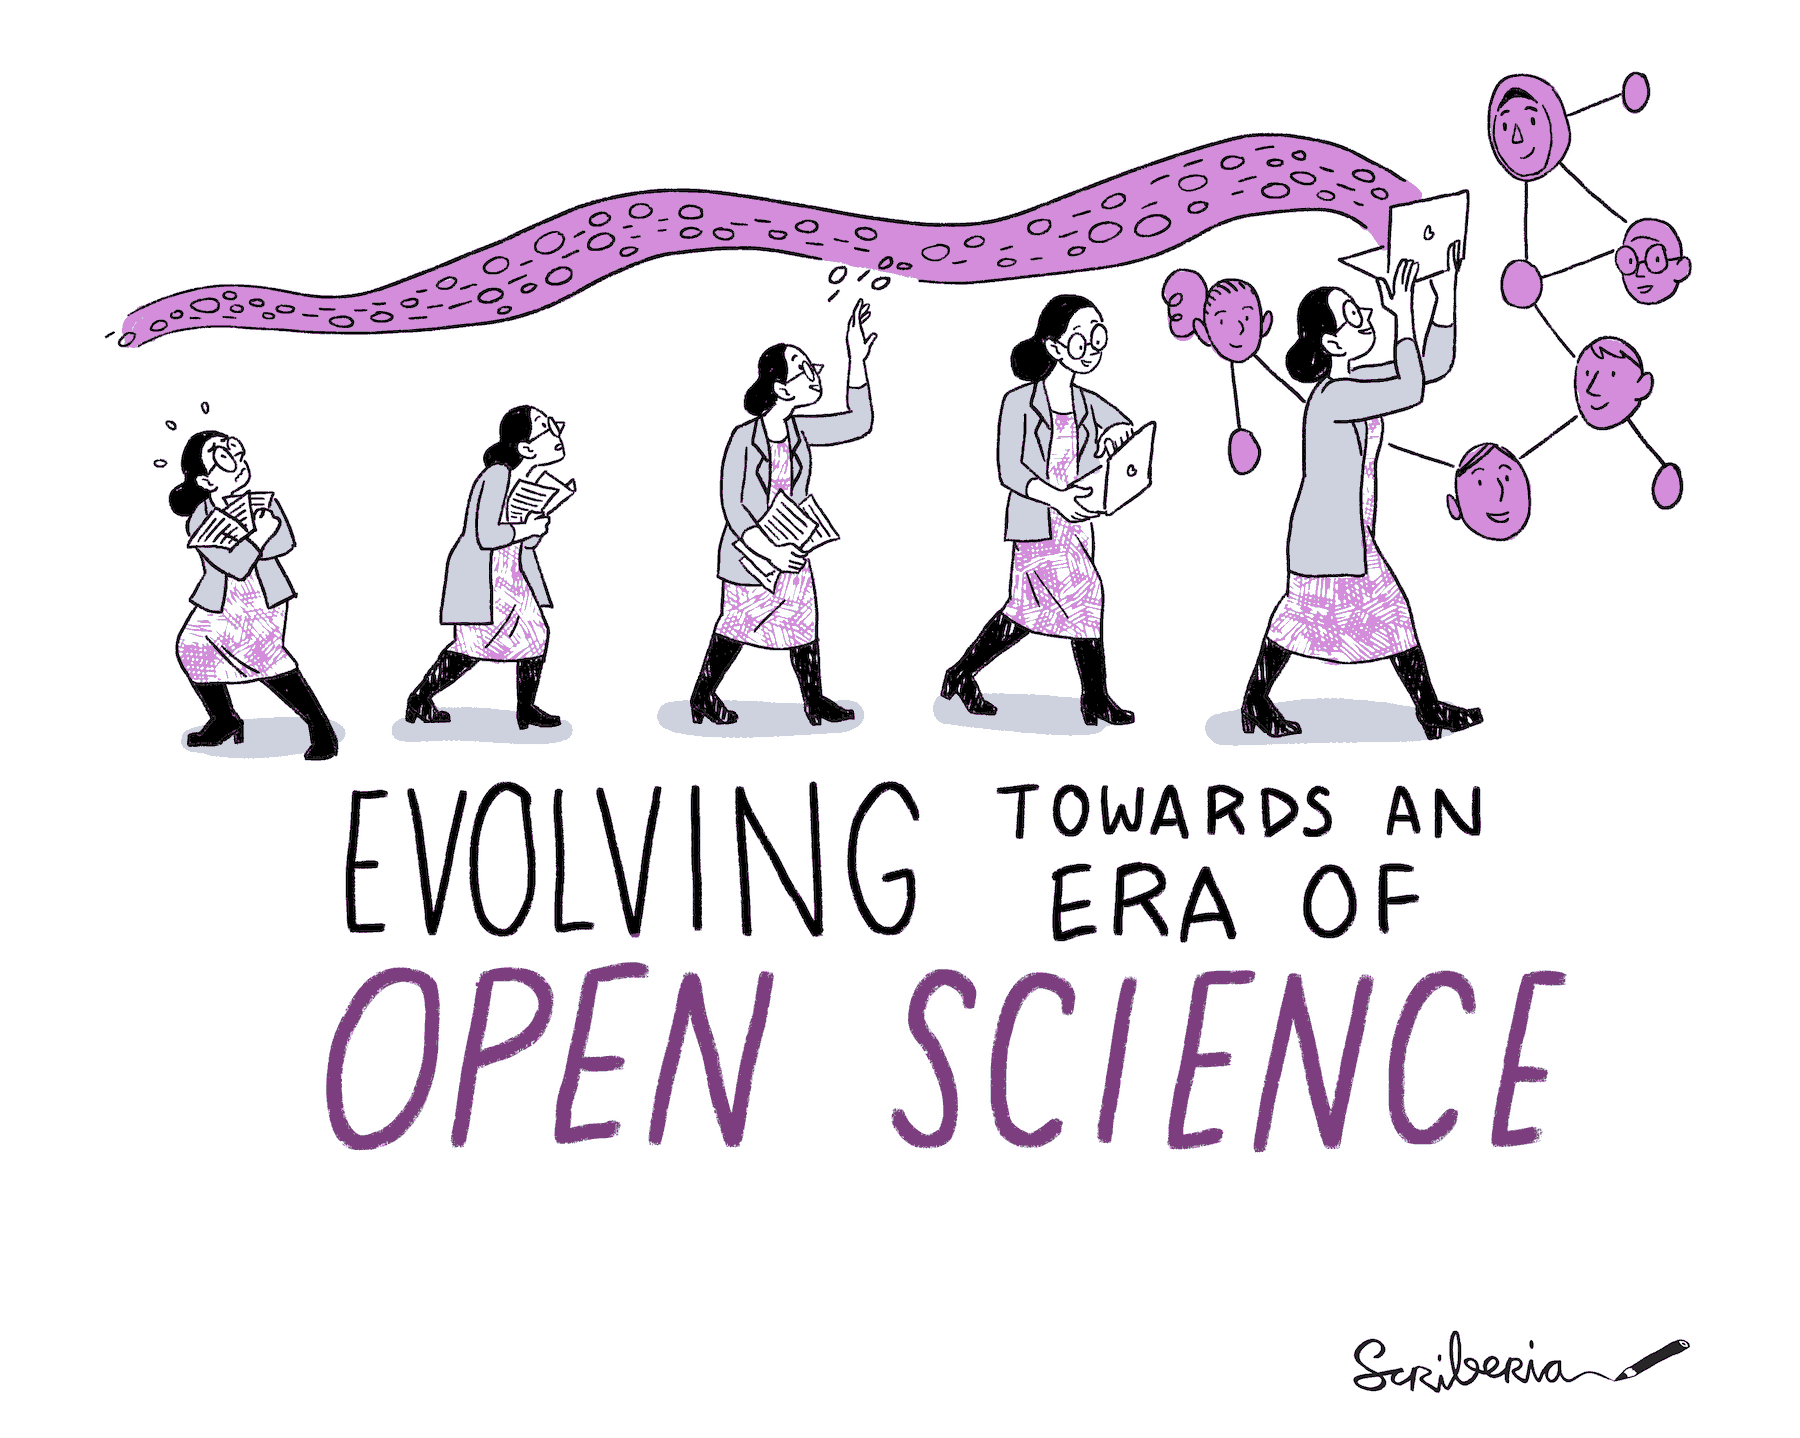 This image shows the evolving interest of a new researcher in sharing their work using open science practices.